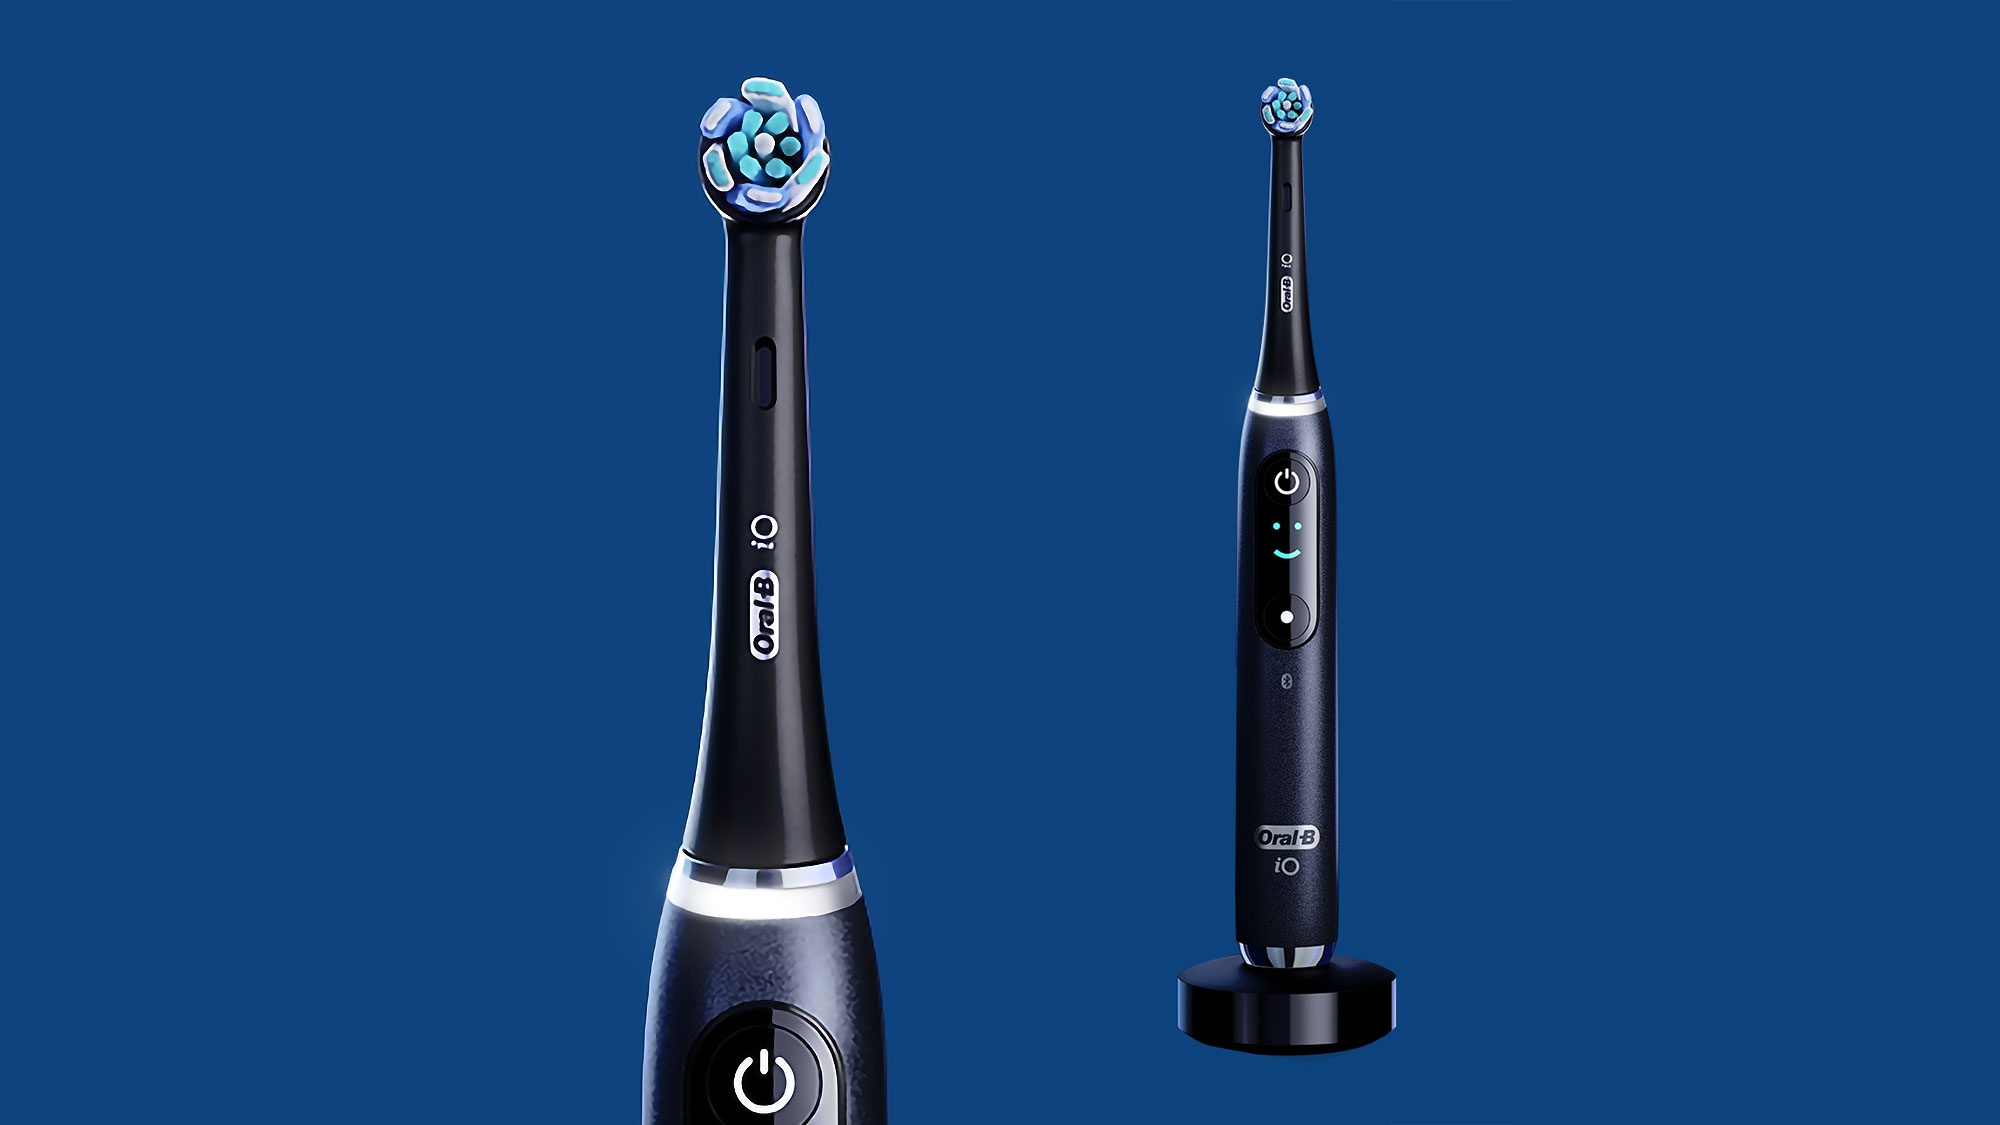 Oral B iO Electric Toothbrush CES 2020 Featured image